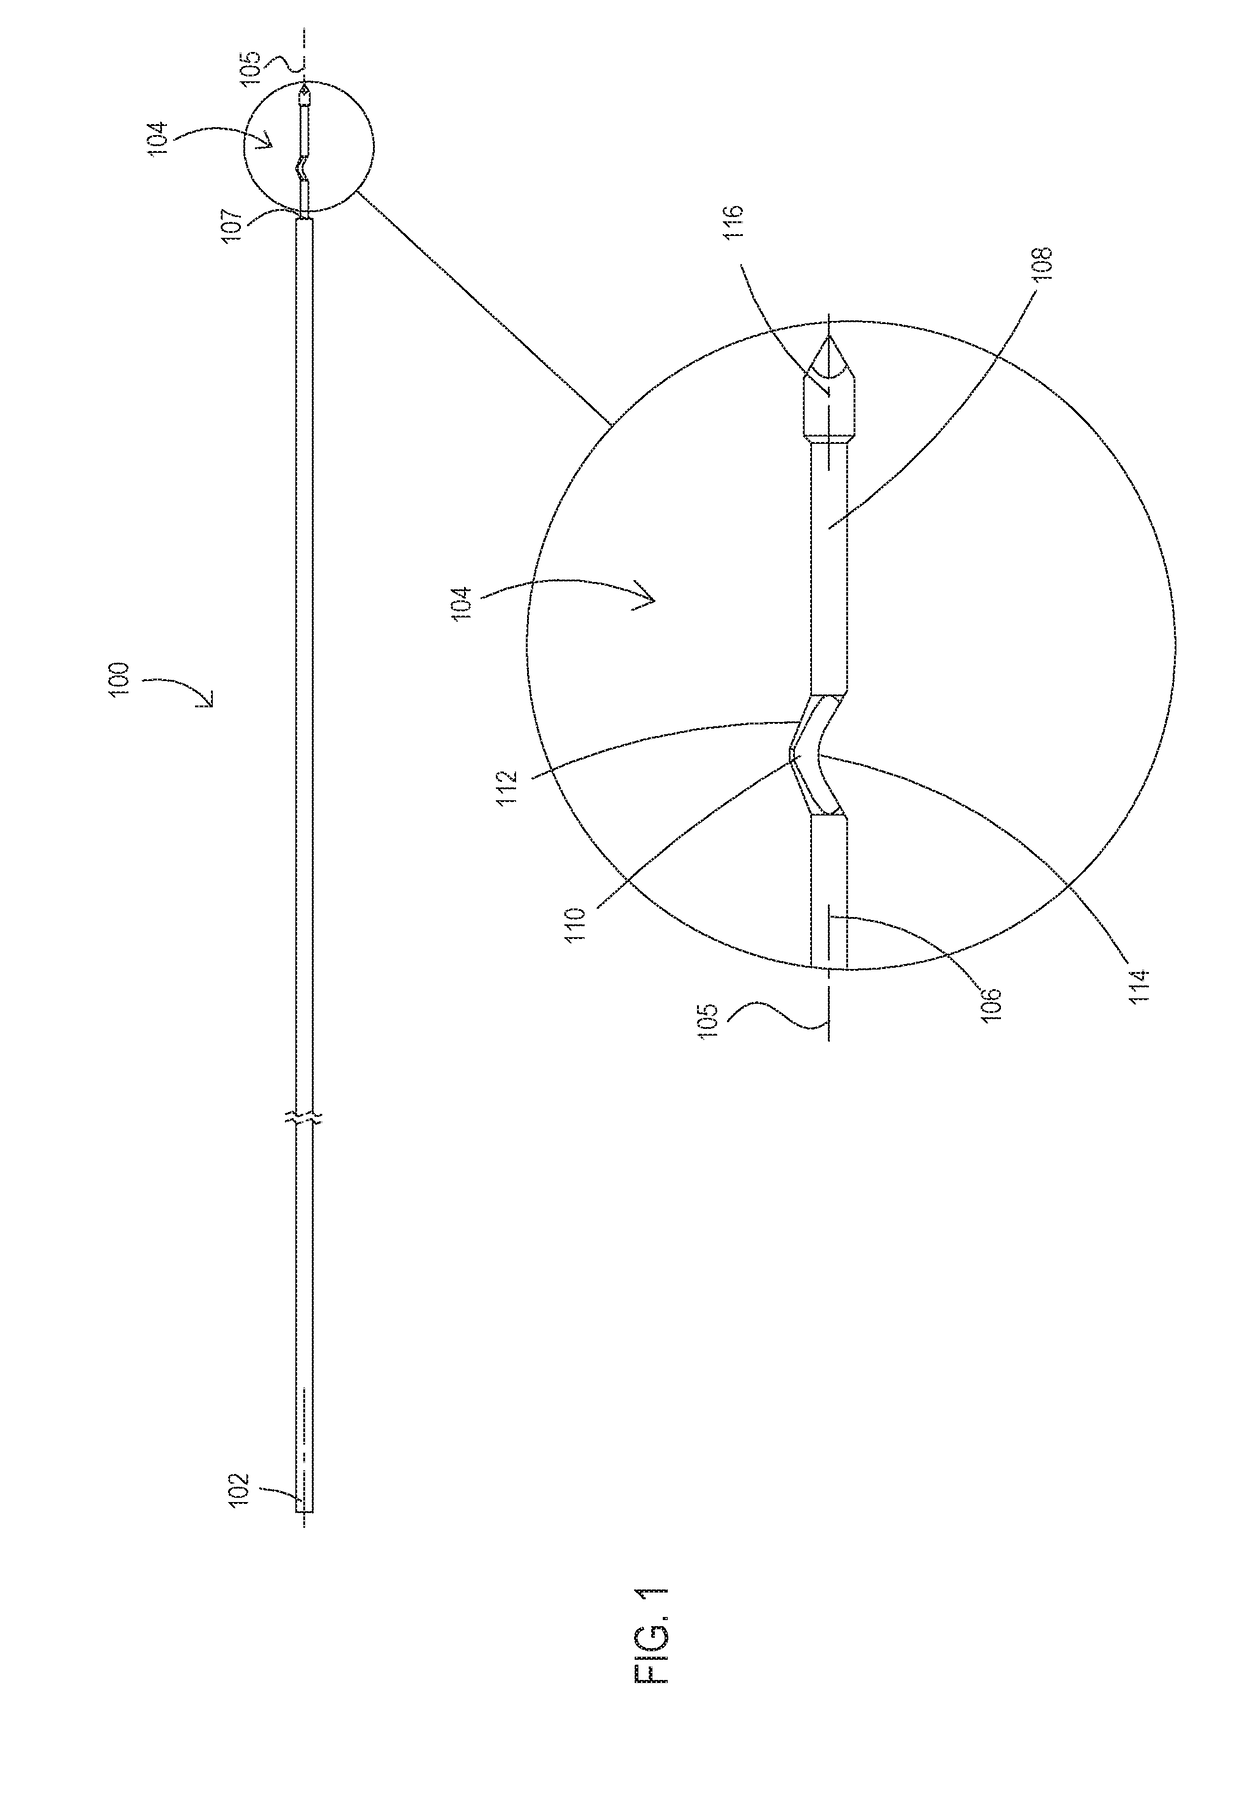 Bone material removal device and a method for use thereof